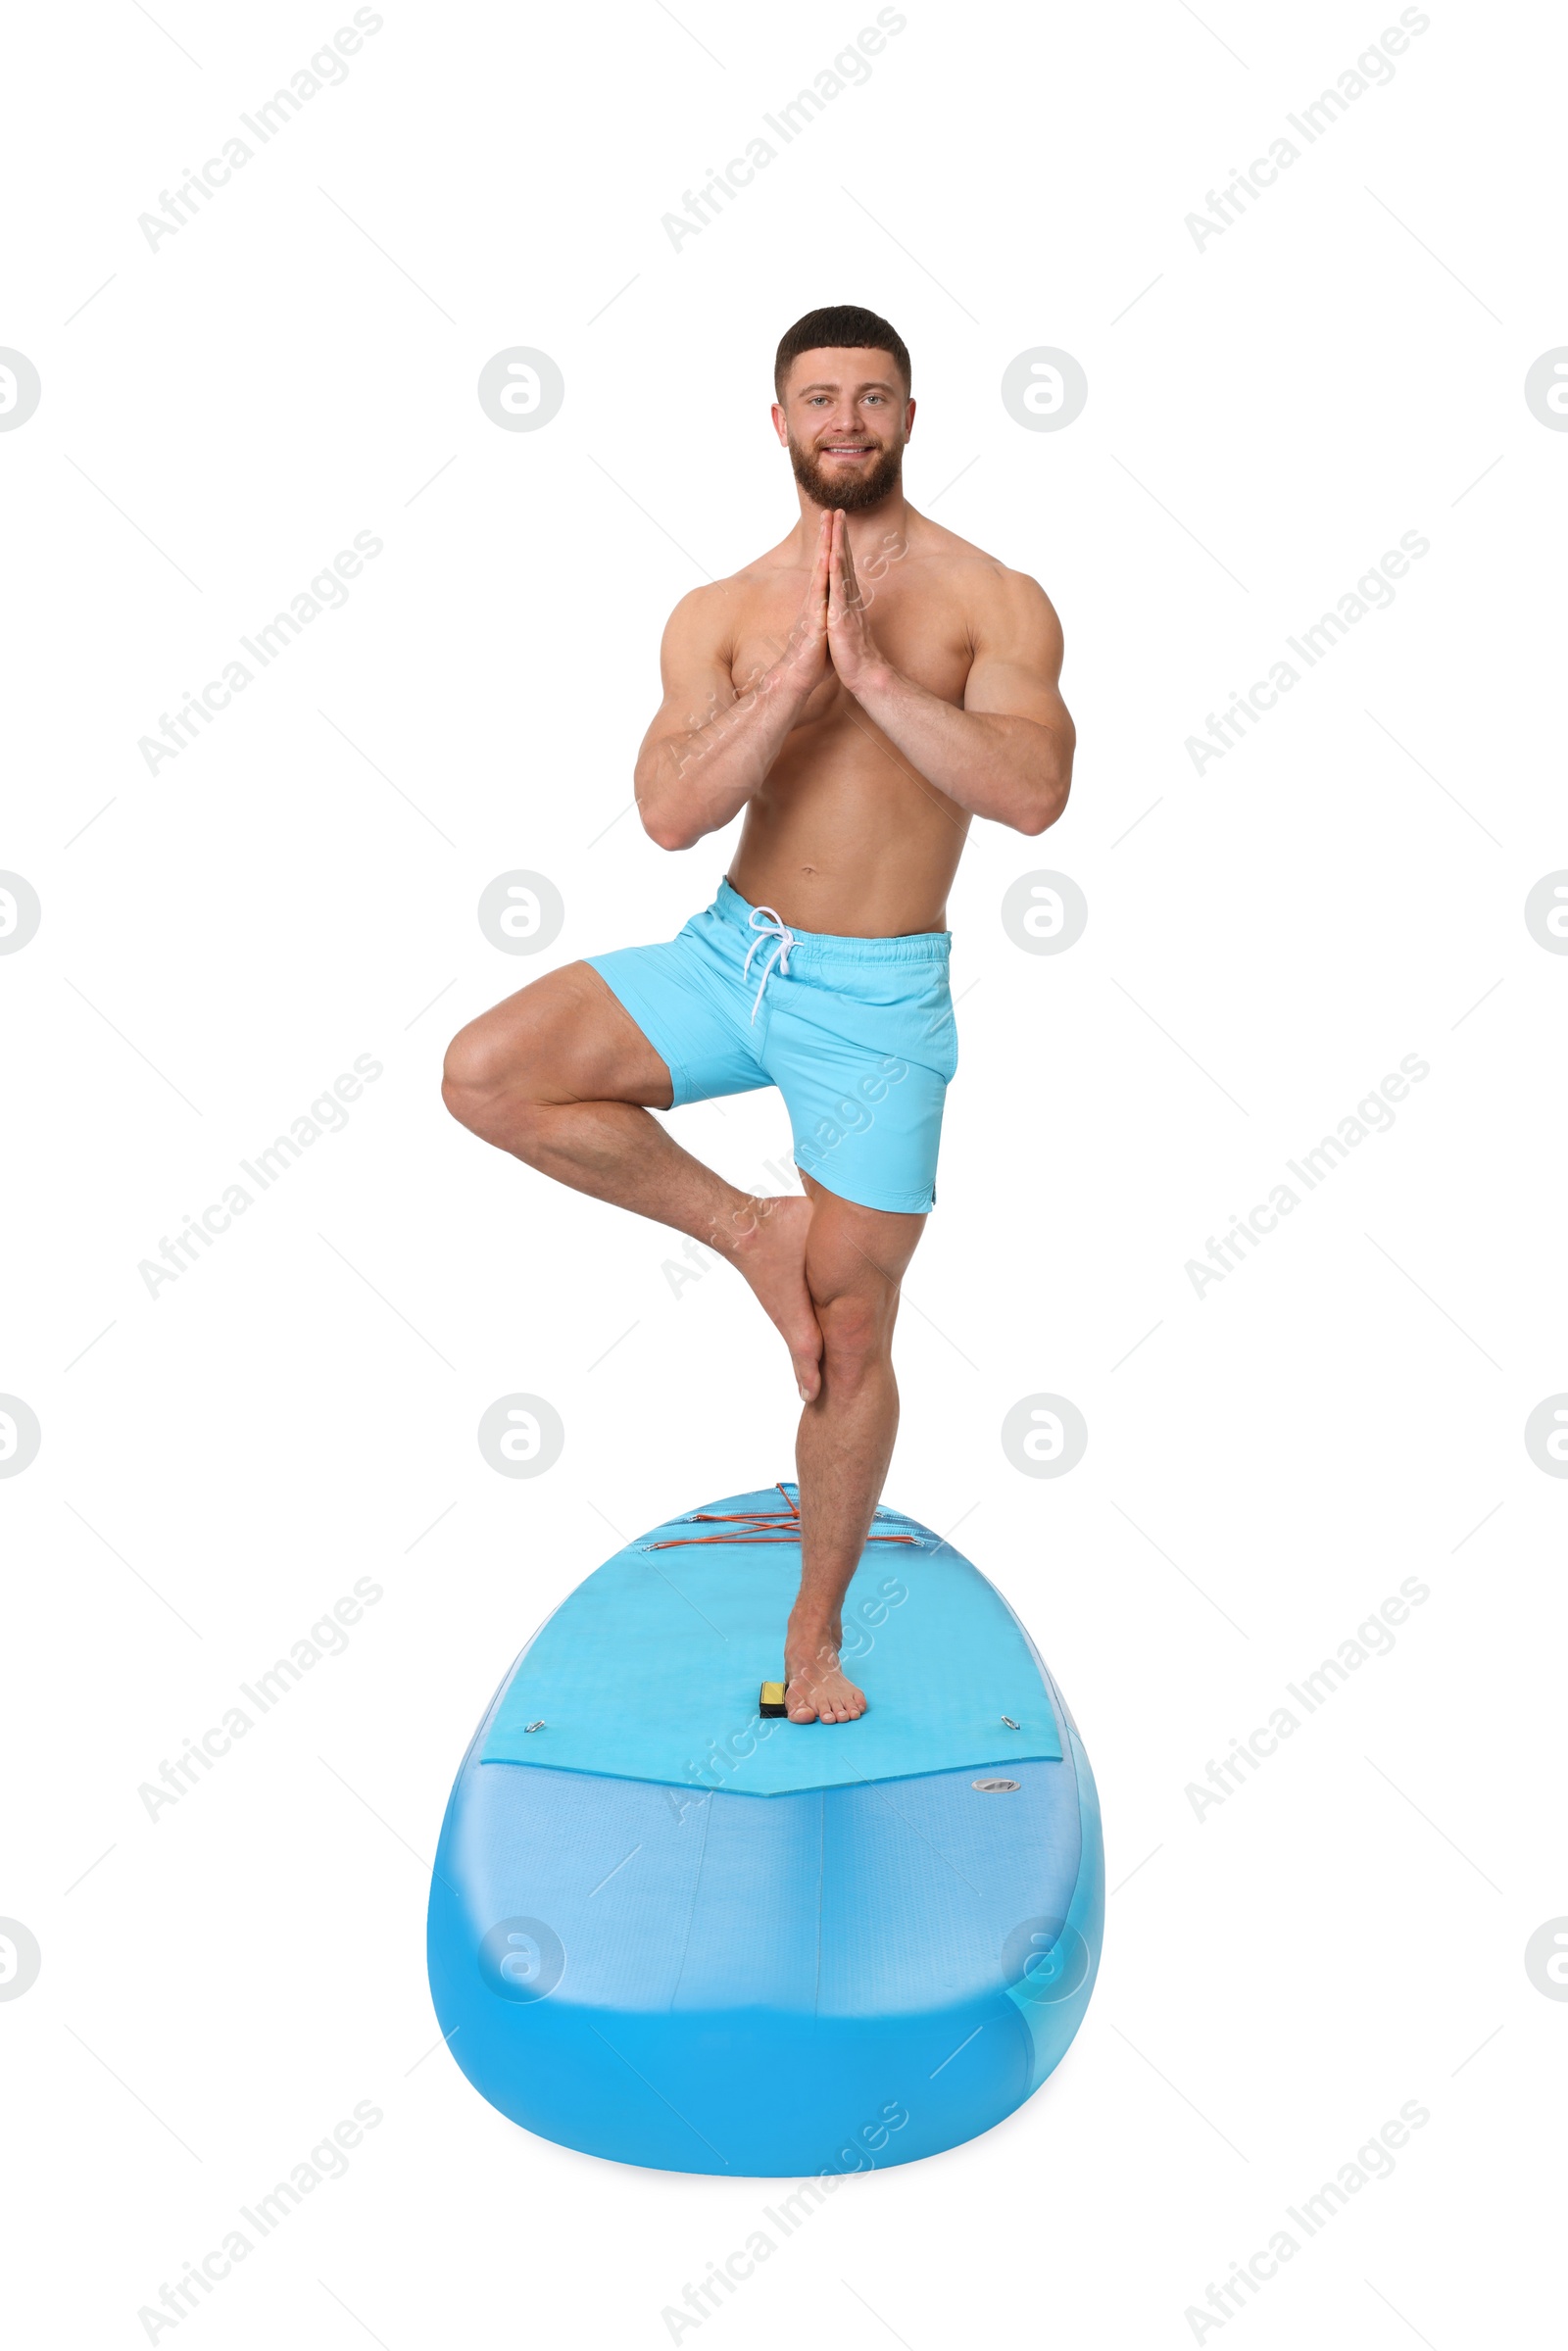 Photo of Happy man practicing yoga on blue SUP board against white background